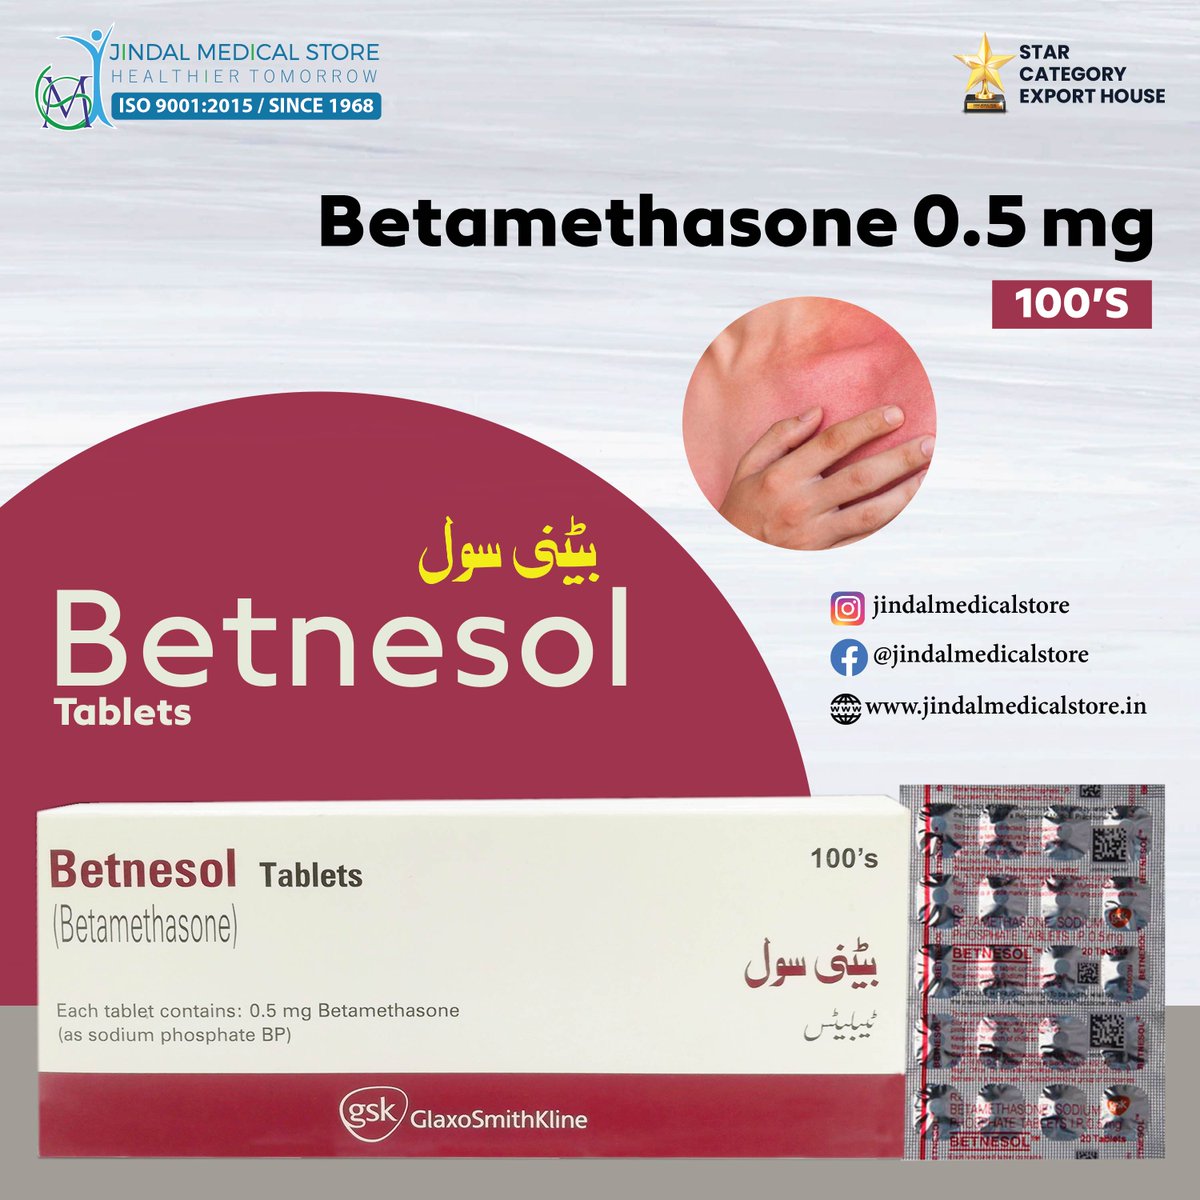 Say goodbye to inflammation with Betnesol tablets! Packed with betamethasone, it's your go-to for tackling swelling, redness, and allergies.

#Betnesol #InflammationRelief #Healthcare #TreatAllergicConditions #Betamethasone #AntiInflammatory #SkinCare #JindalMedicalStore #JMS